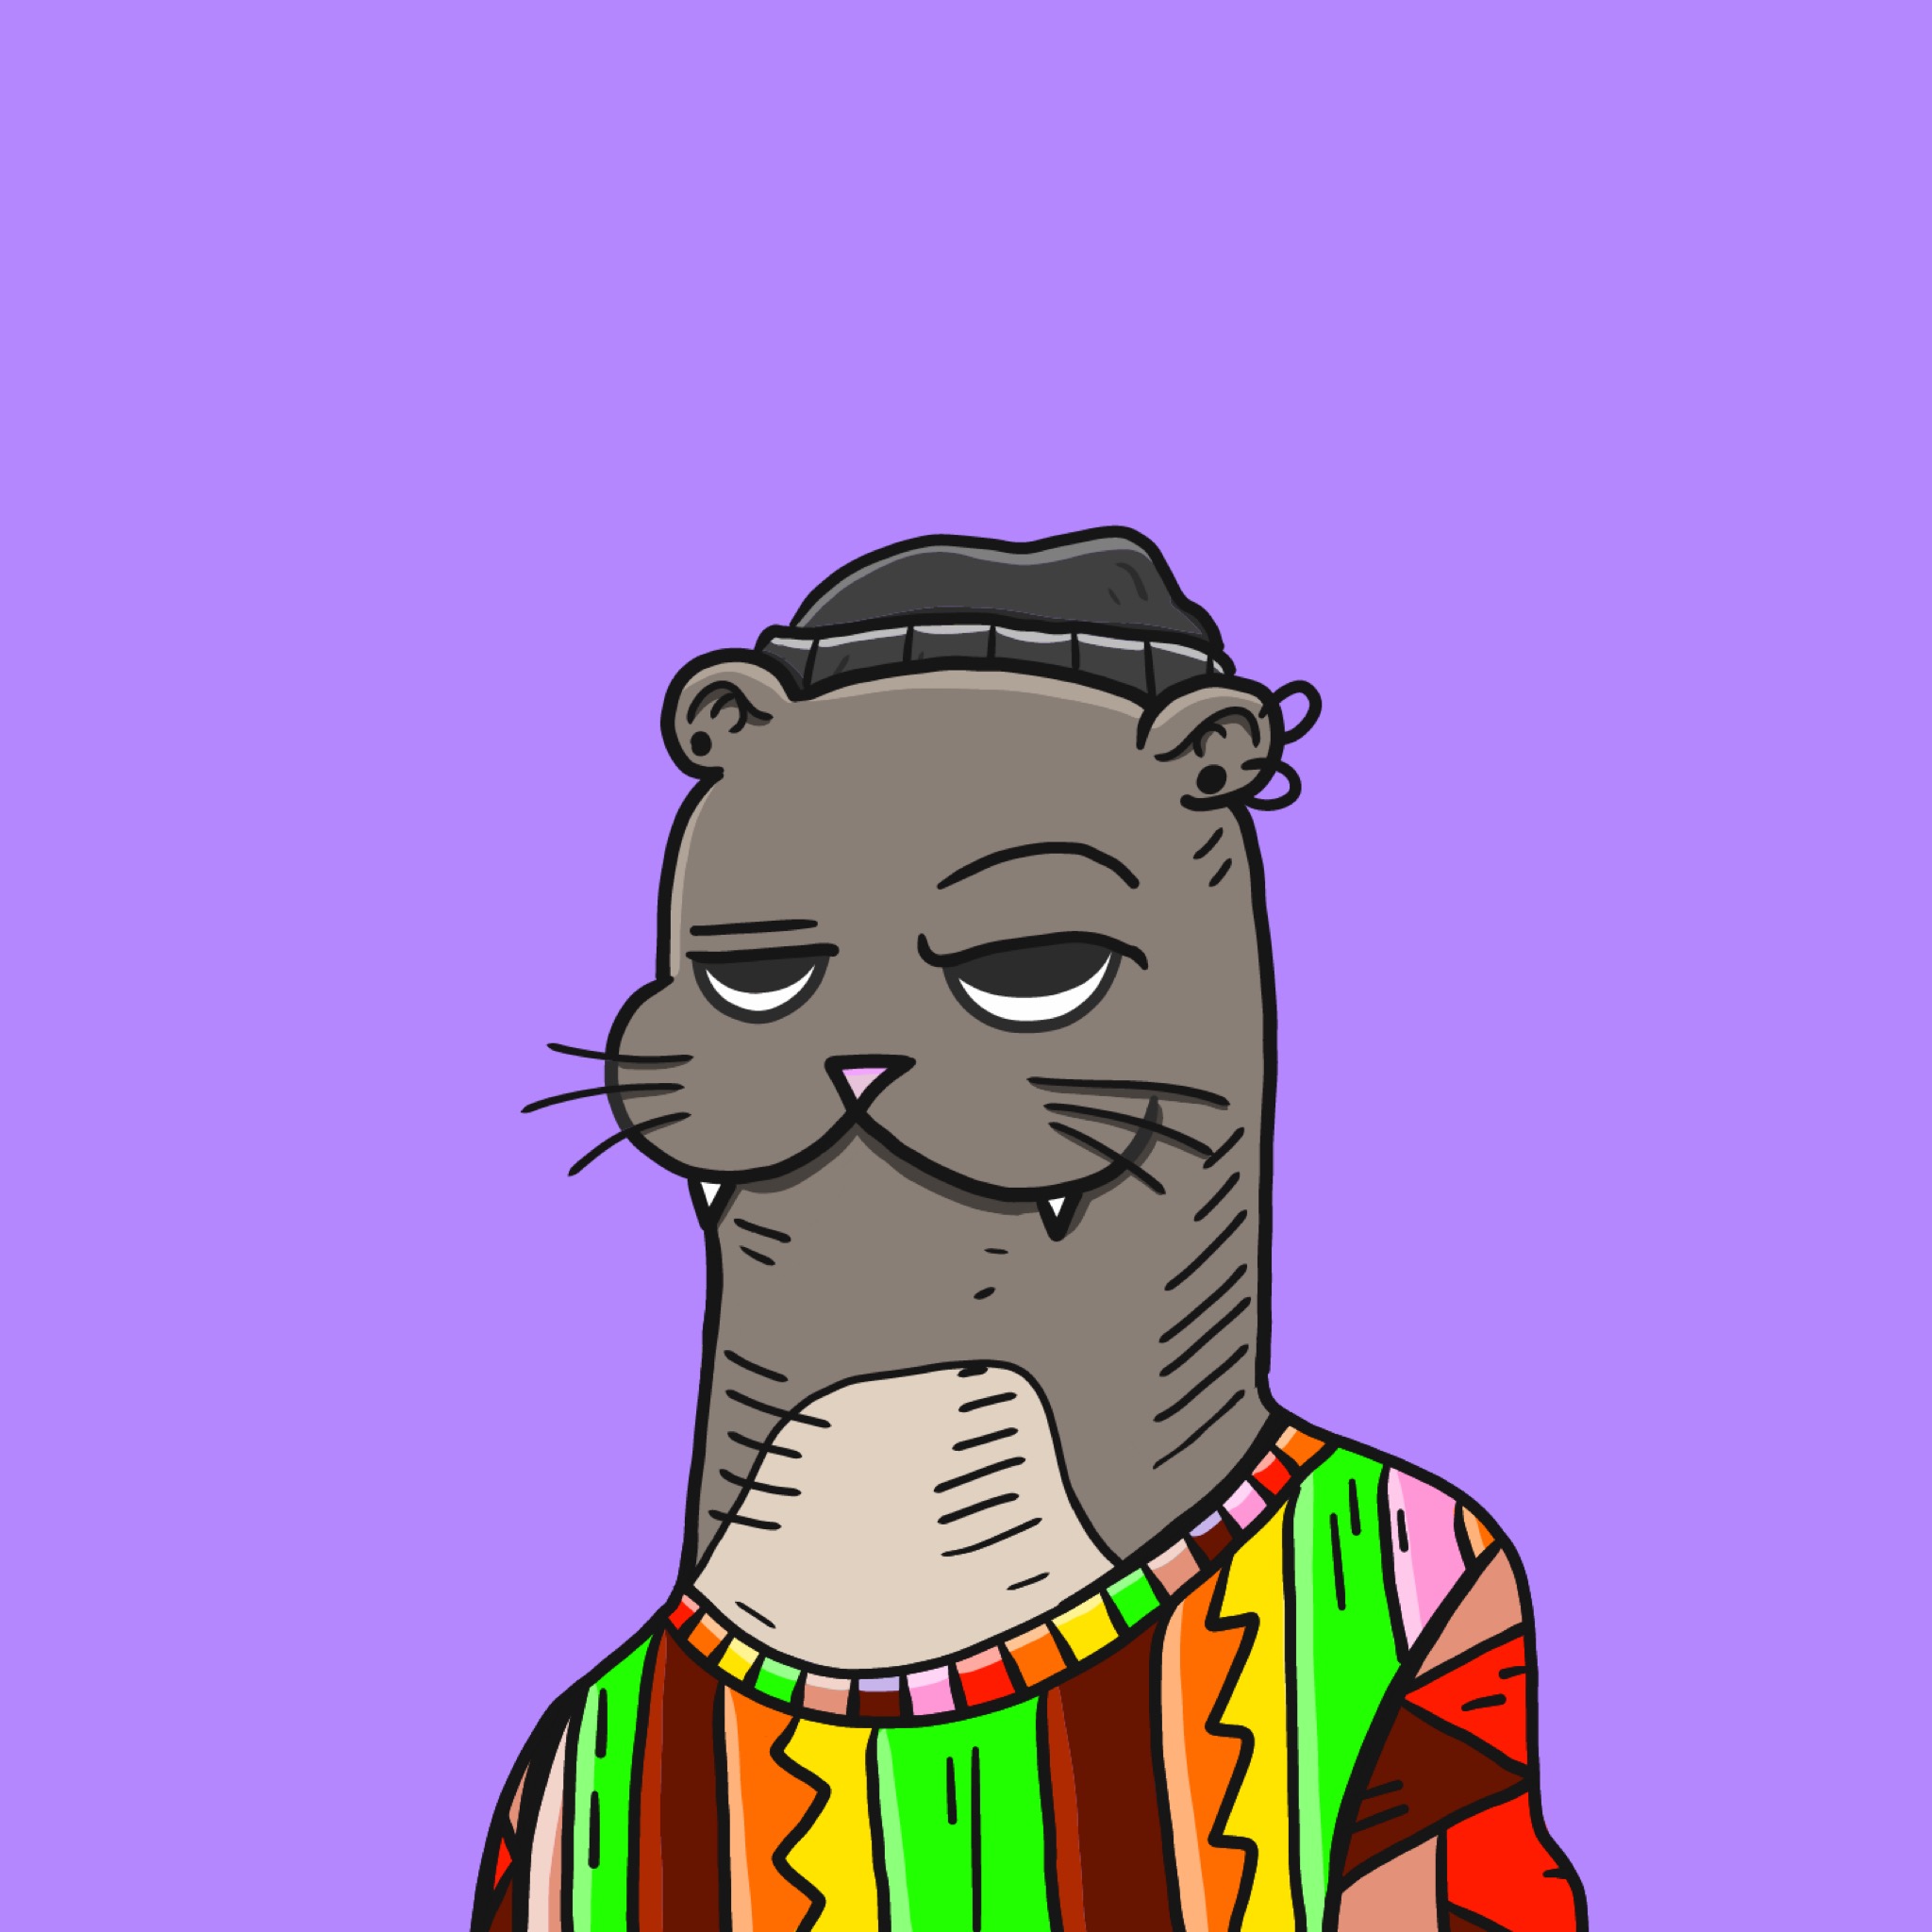 AlxOtter